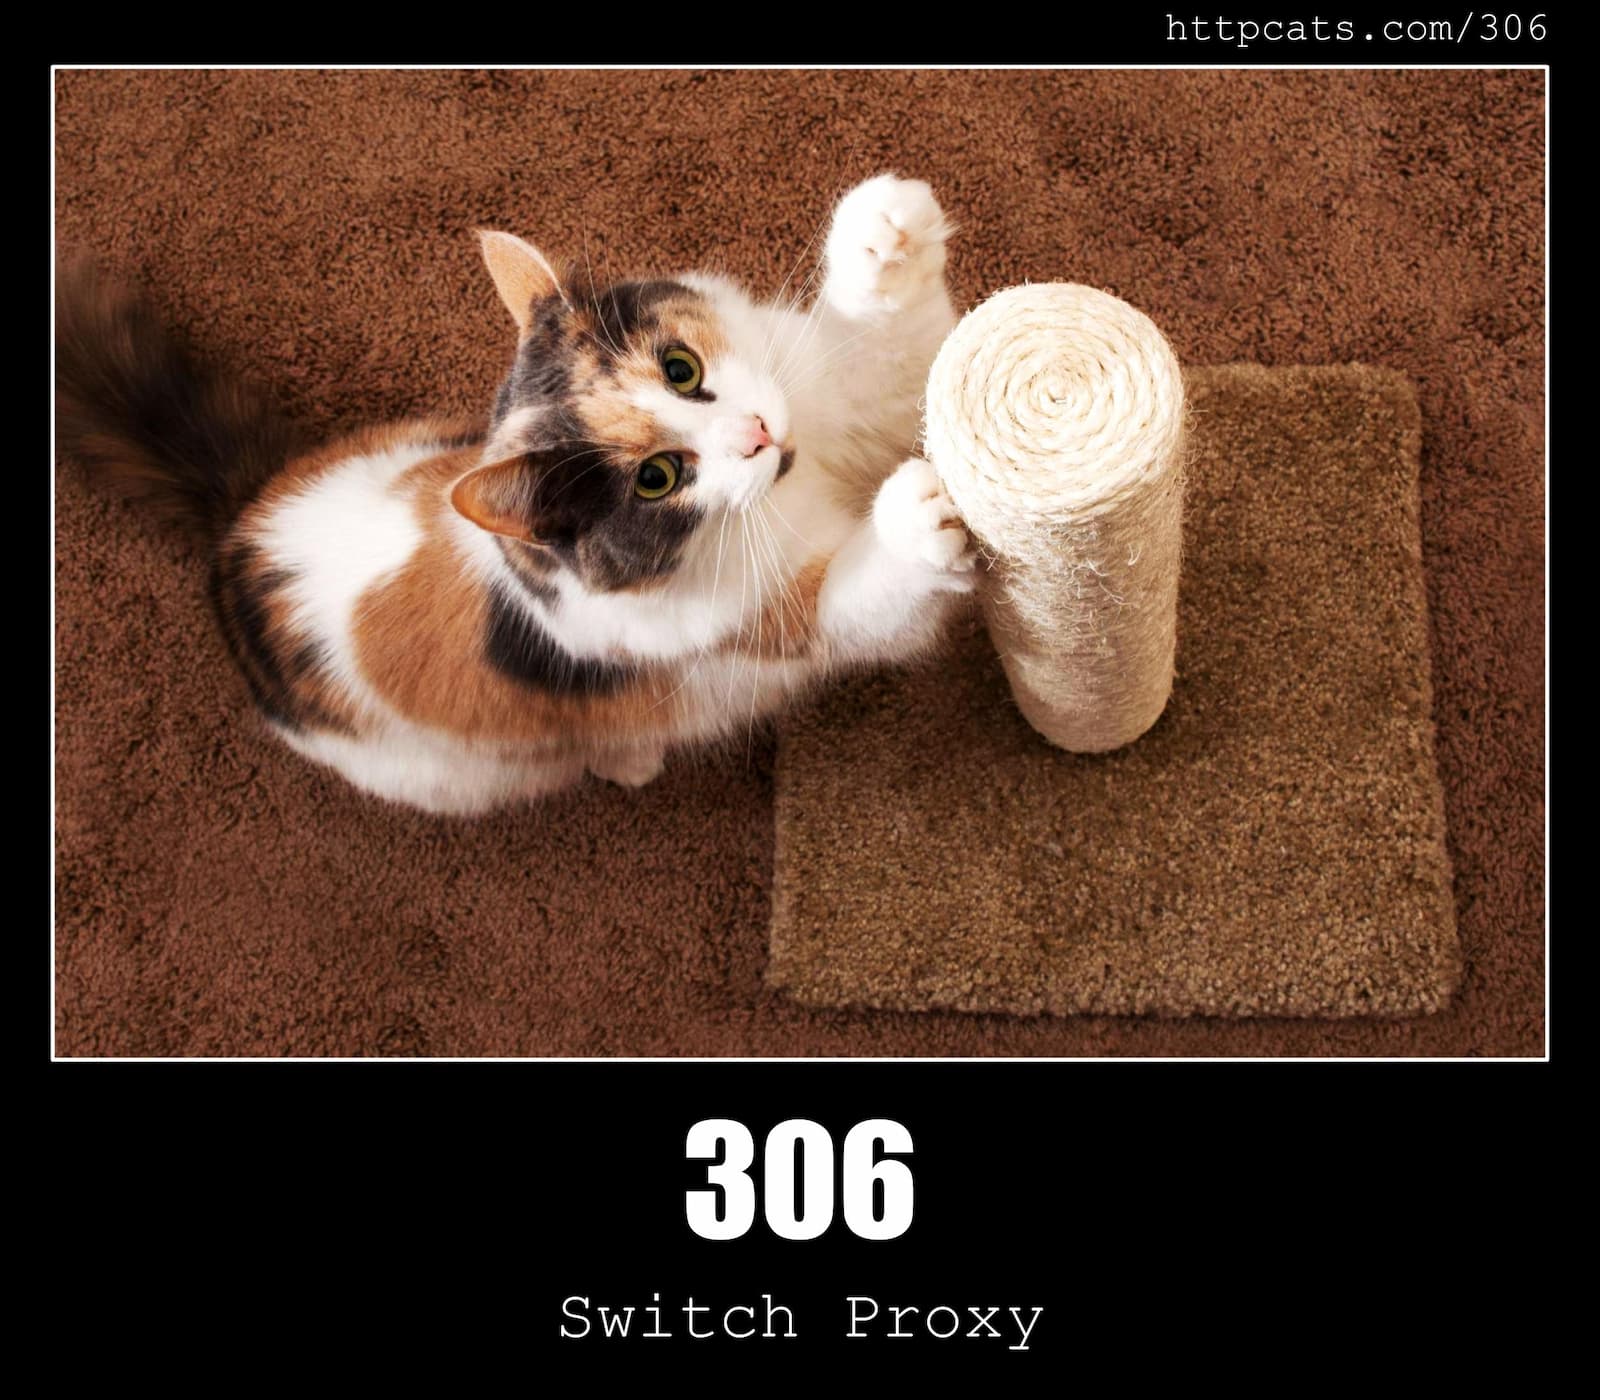 306 Switch Proxy Http Status Code And Cats